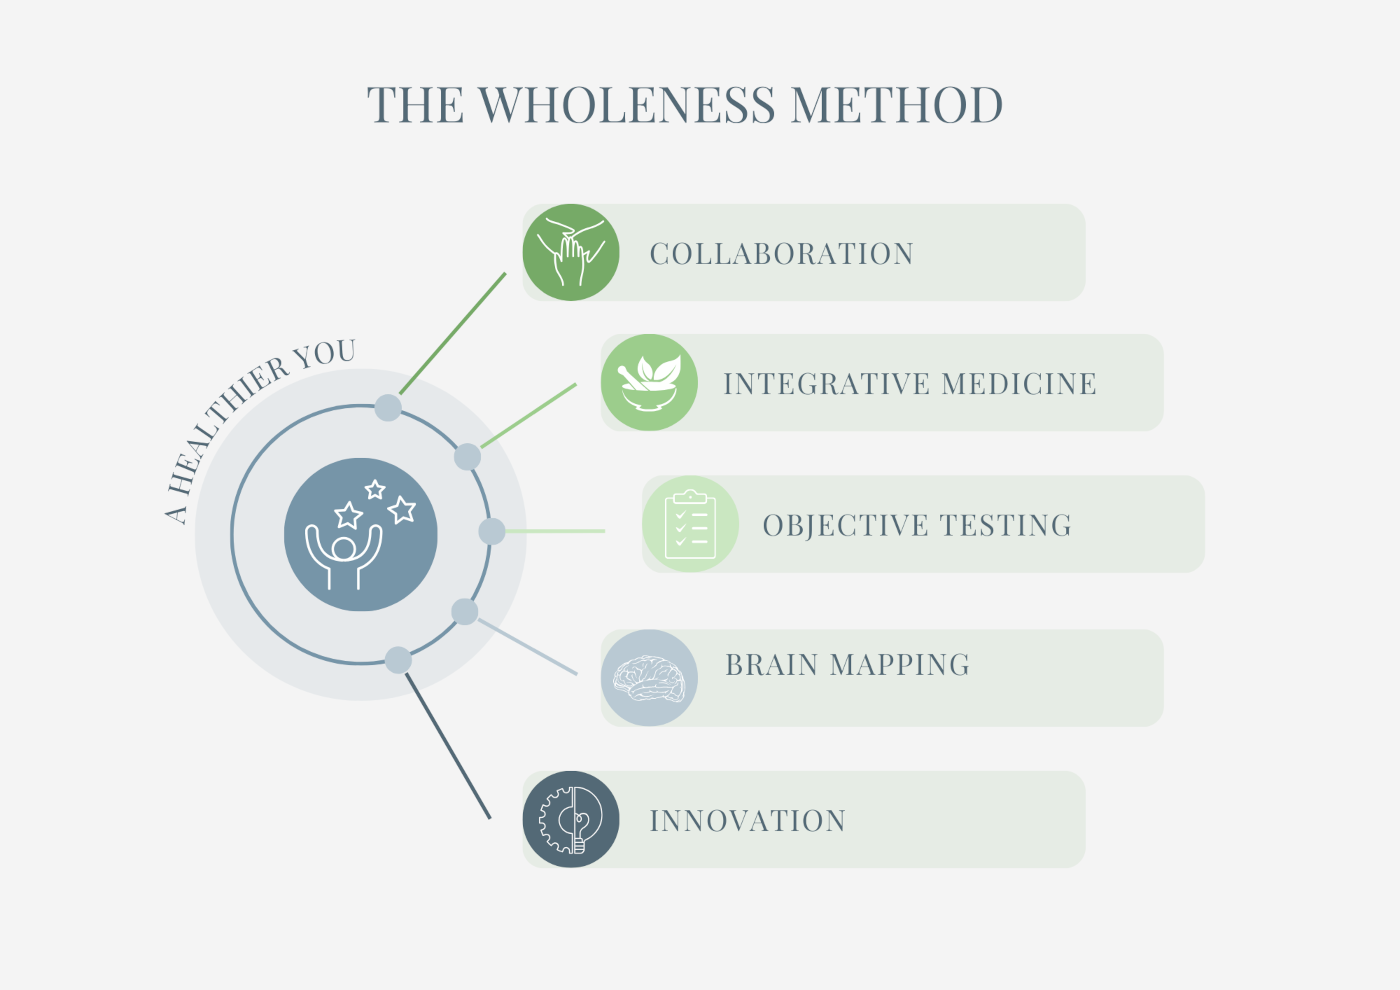 The Wholeness Method of Integrated Medicine